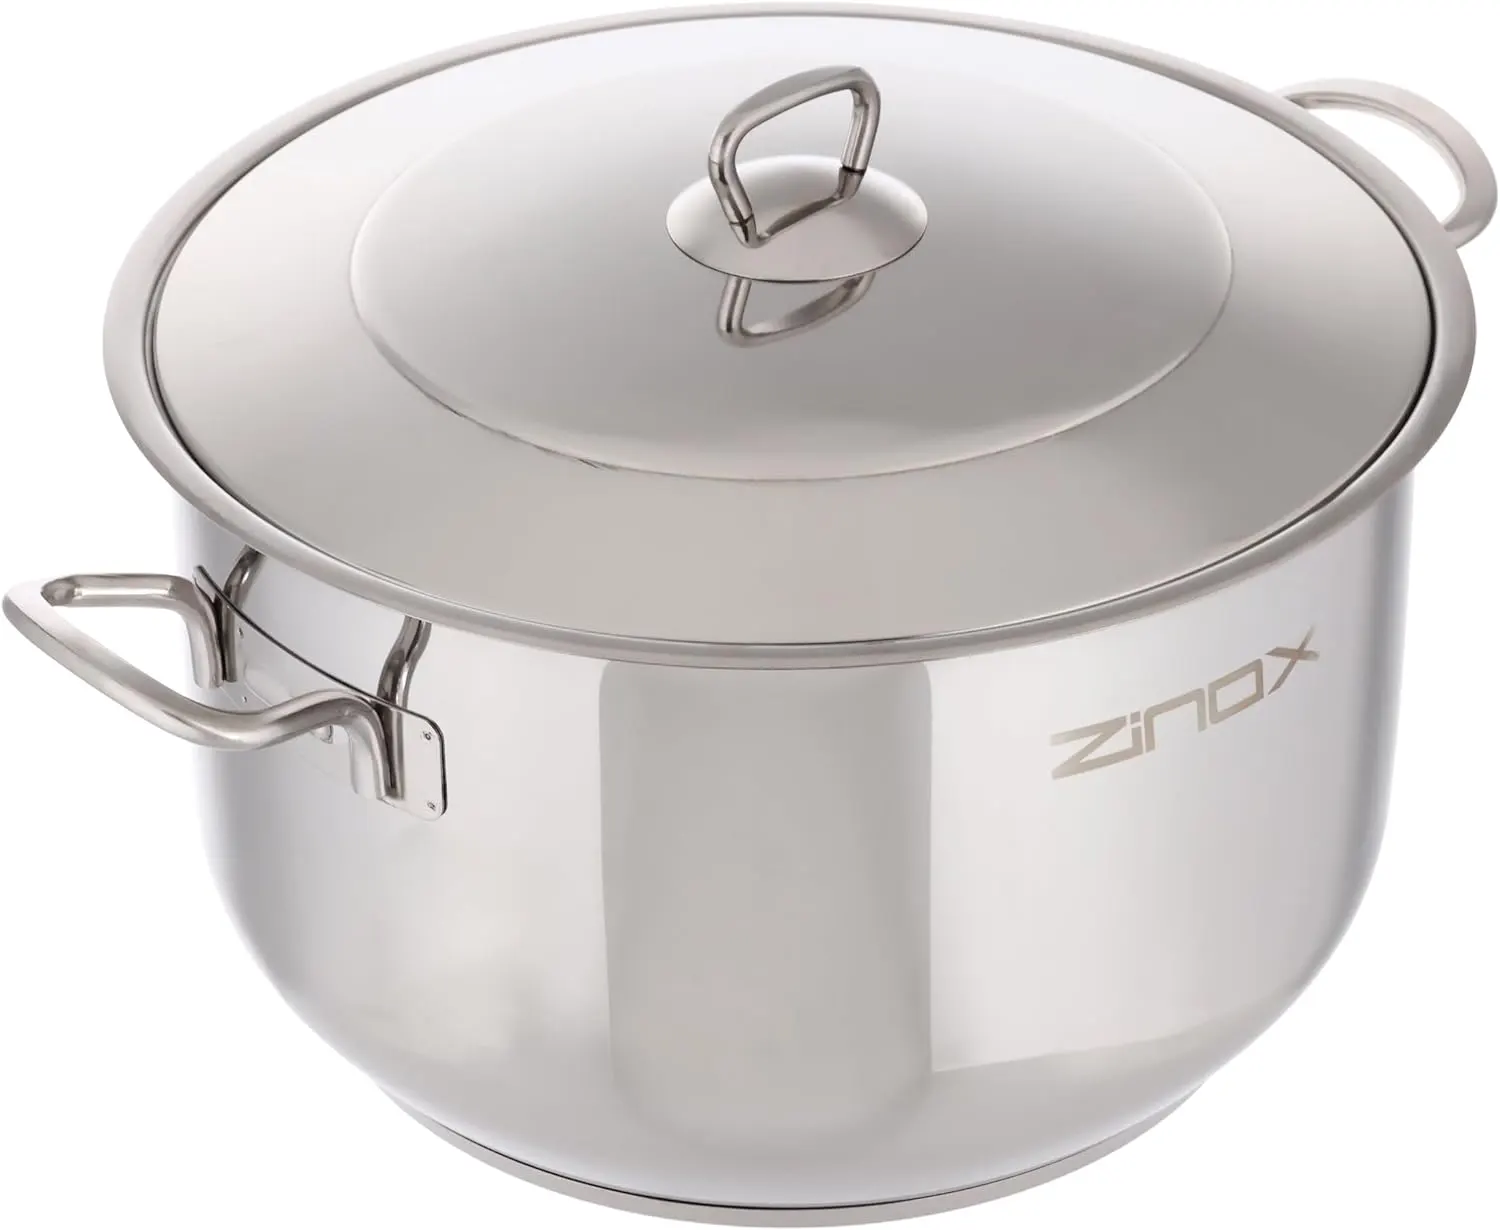 Zinox Classic stainless steel pot , size 34, silver